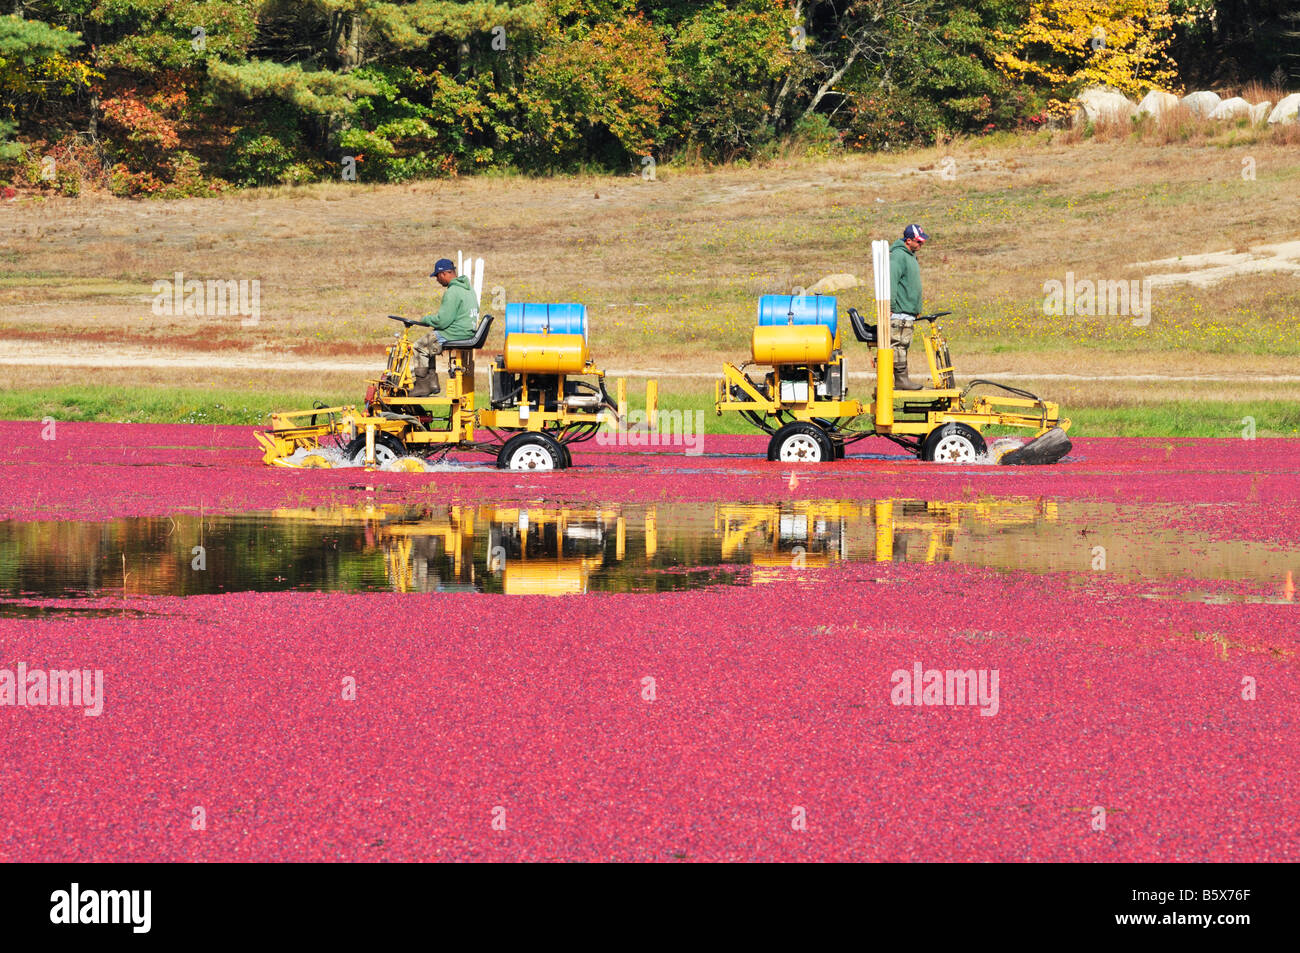 2 men riding on equipment in a flooded bog harvesting red ripe cranberries in New England on an autumn fall day Stock Photo